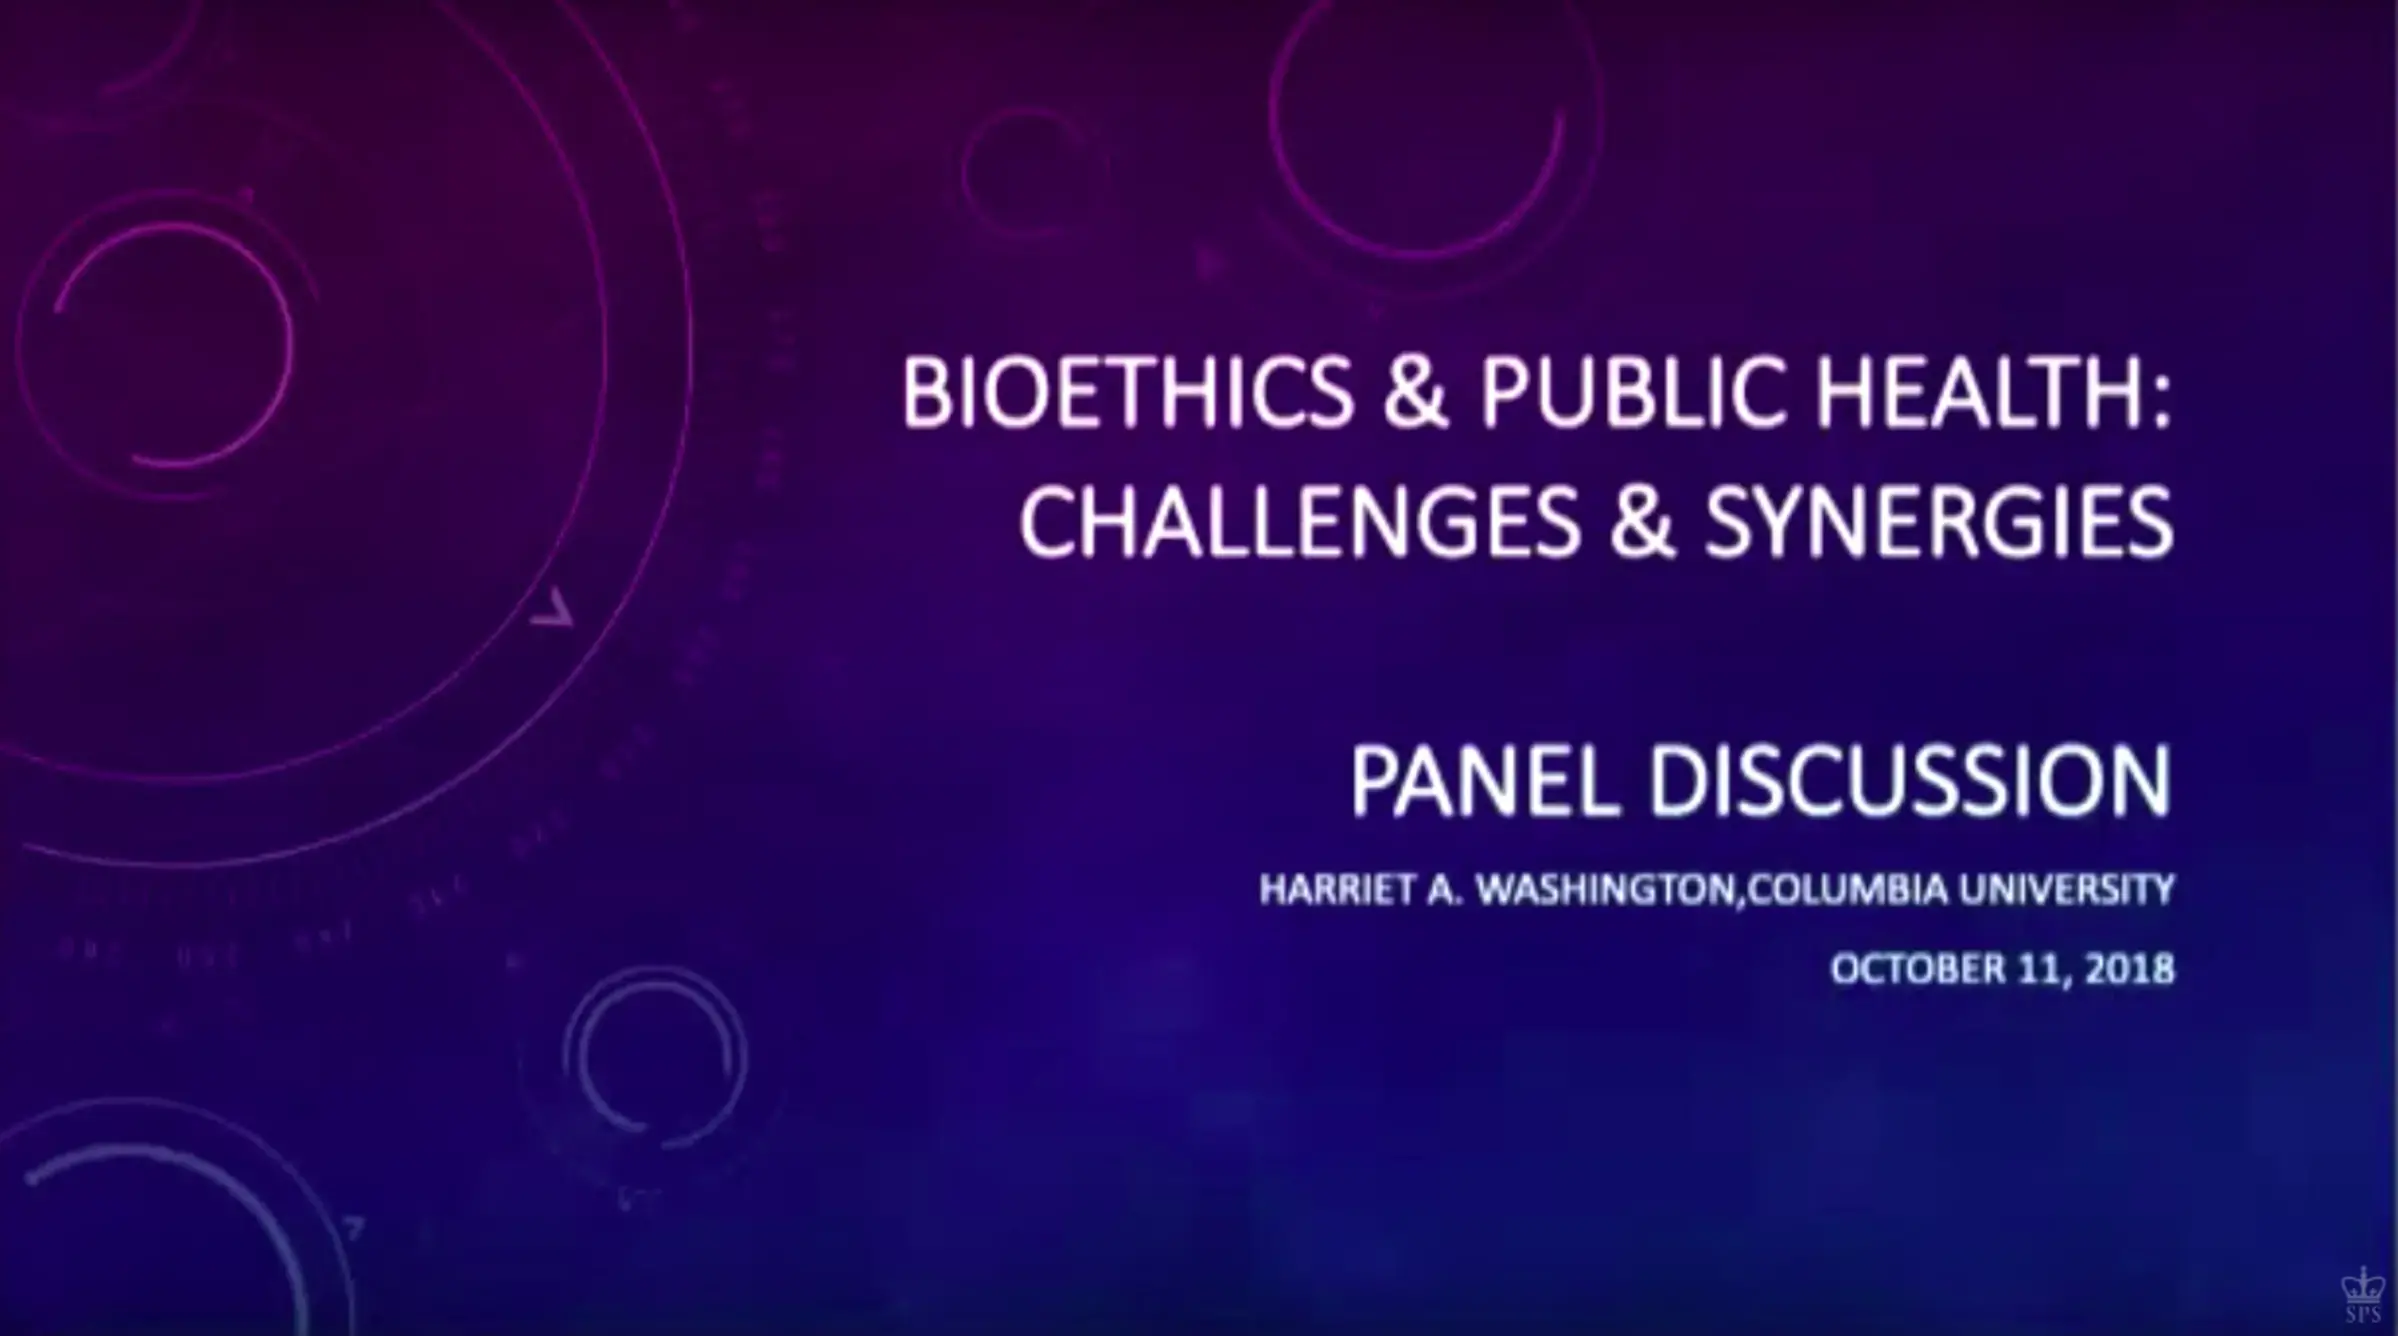 Bioethics and Public Health: Synergies and Challenges